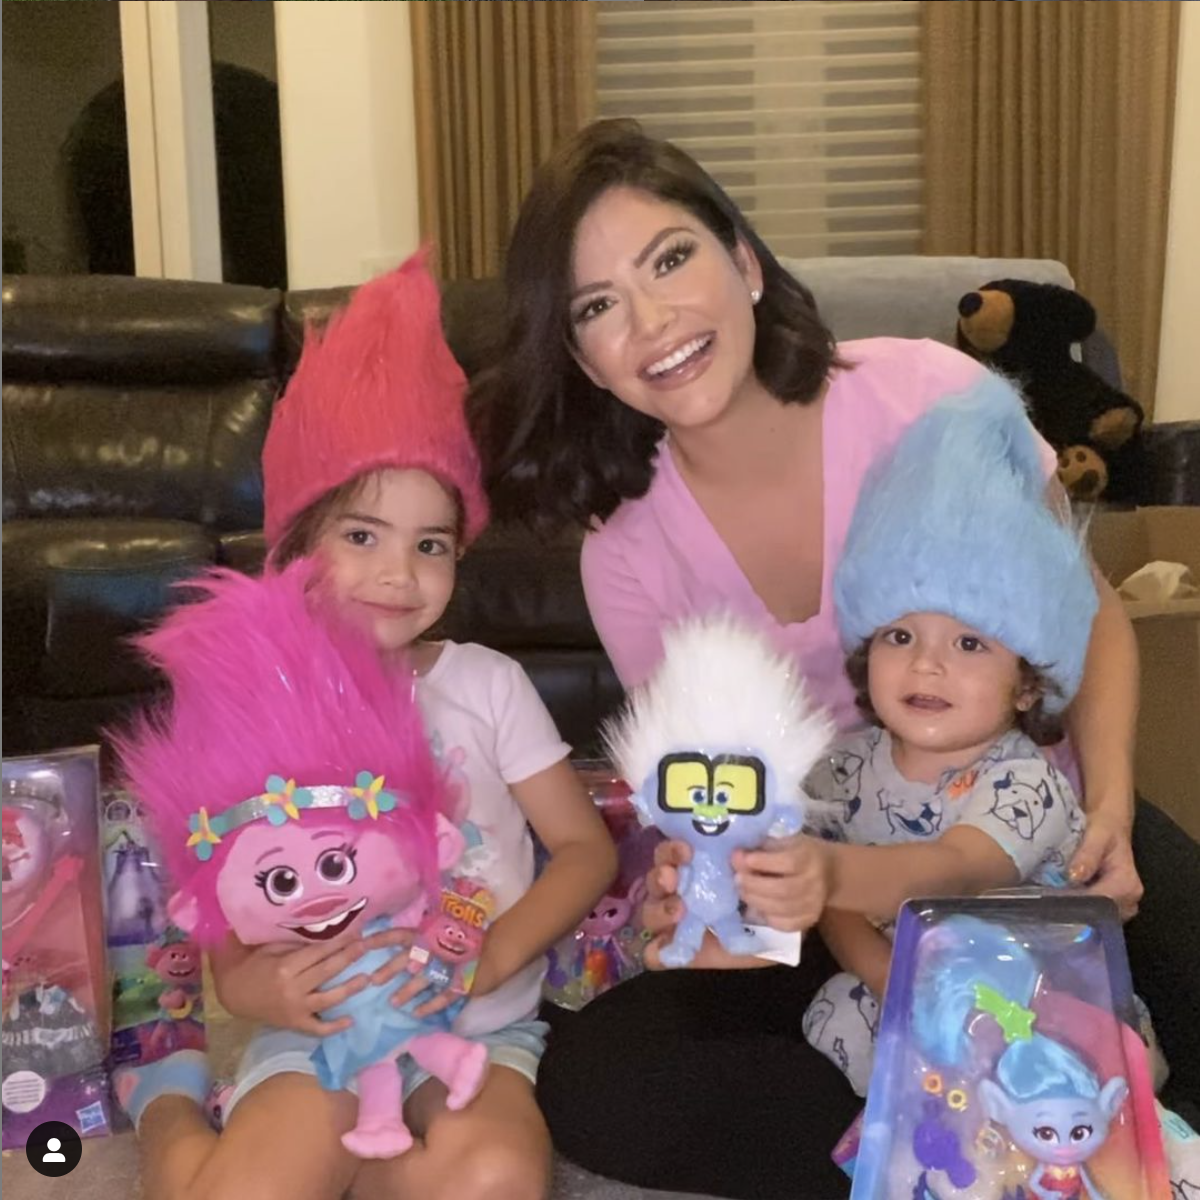 Universal Pictures’ Trolls World Tour Movie celebrity seeding with Ana Patricia, host of Univision’s “Enamorandonos” and her daughter.